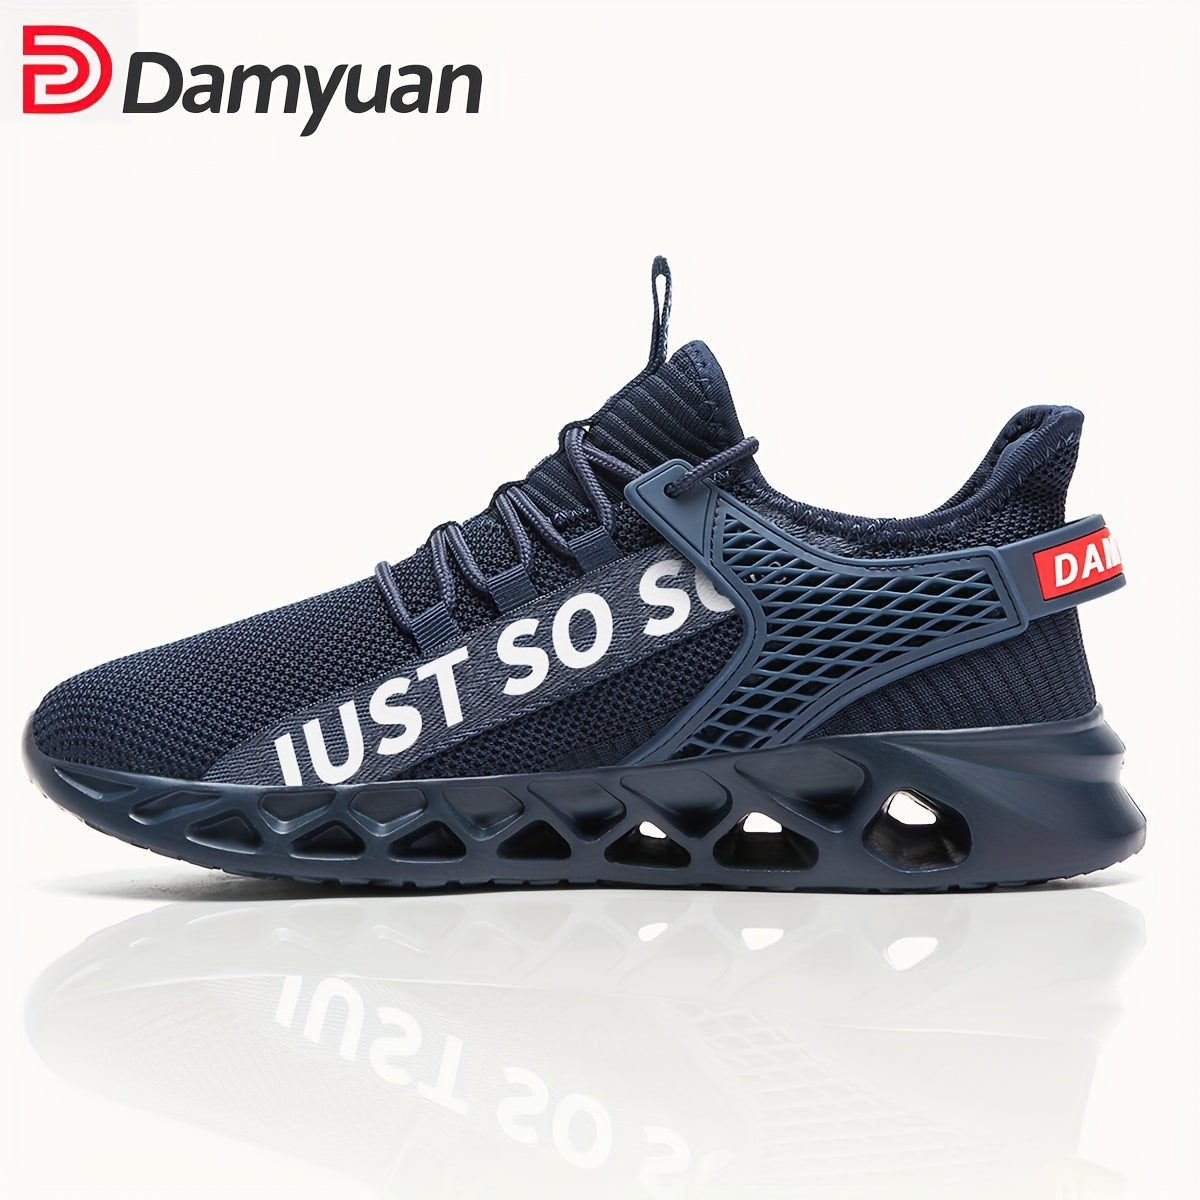 Damyuan Men's Blade Type Shoes, Breathable Shock Absorption Running Shoes Lightweight Non-Slip Shoes For Jogging Tennis Gym, Casual Walking Sneakers